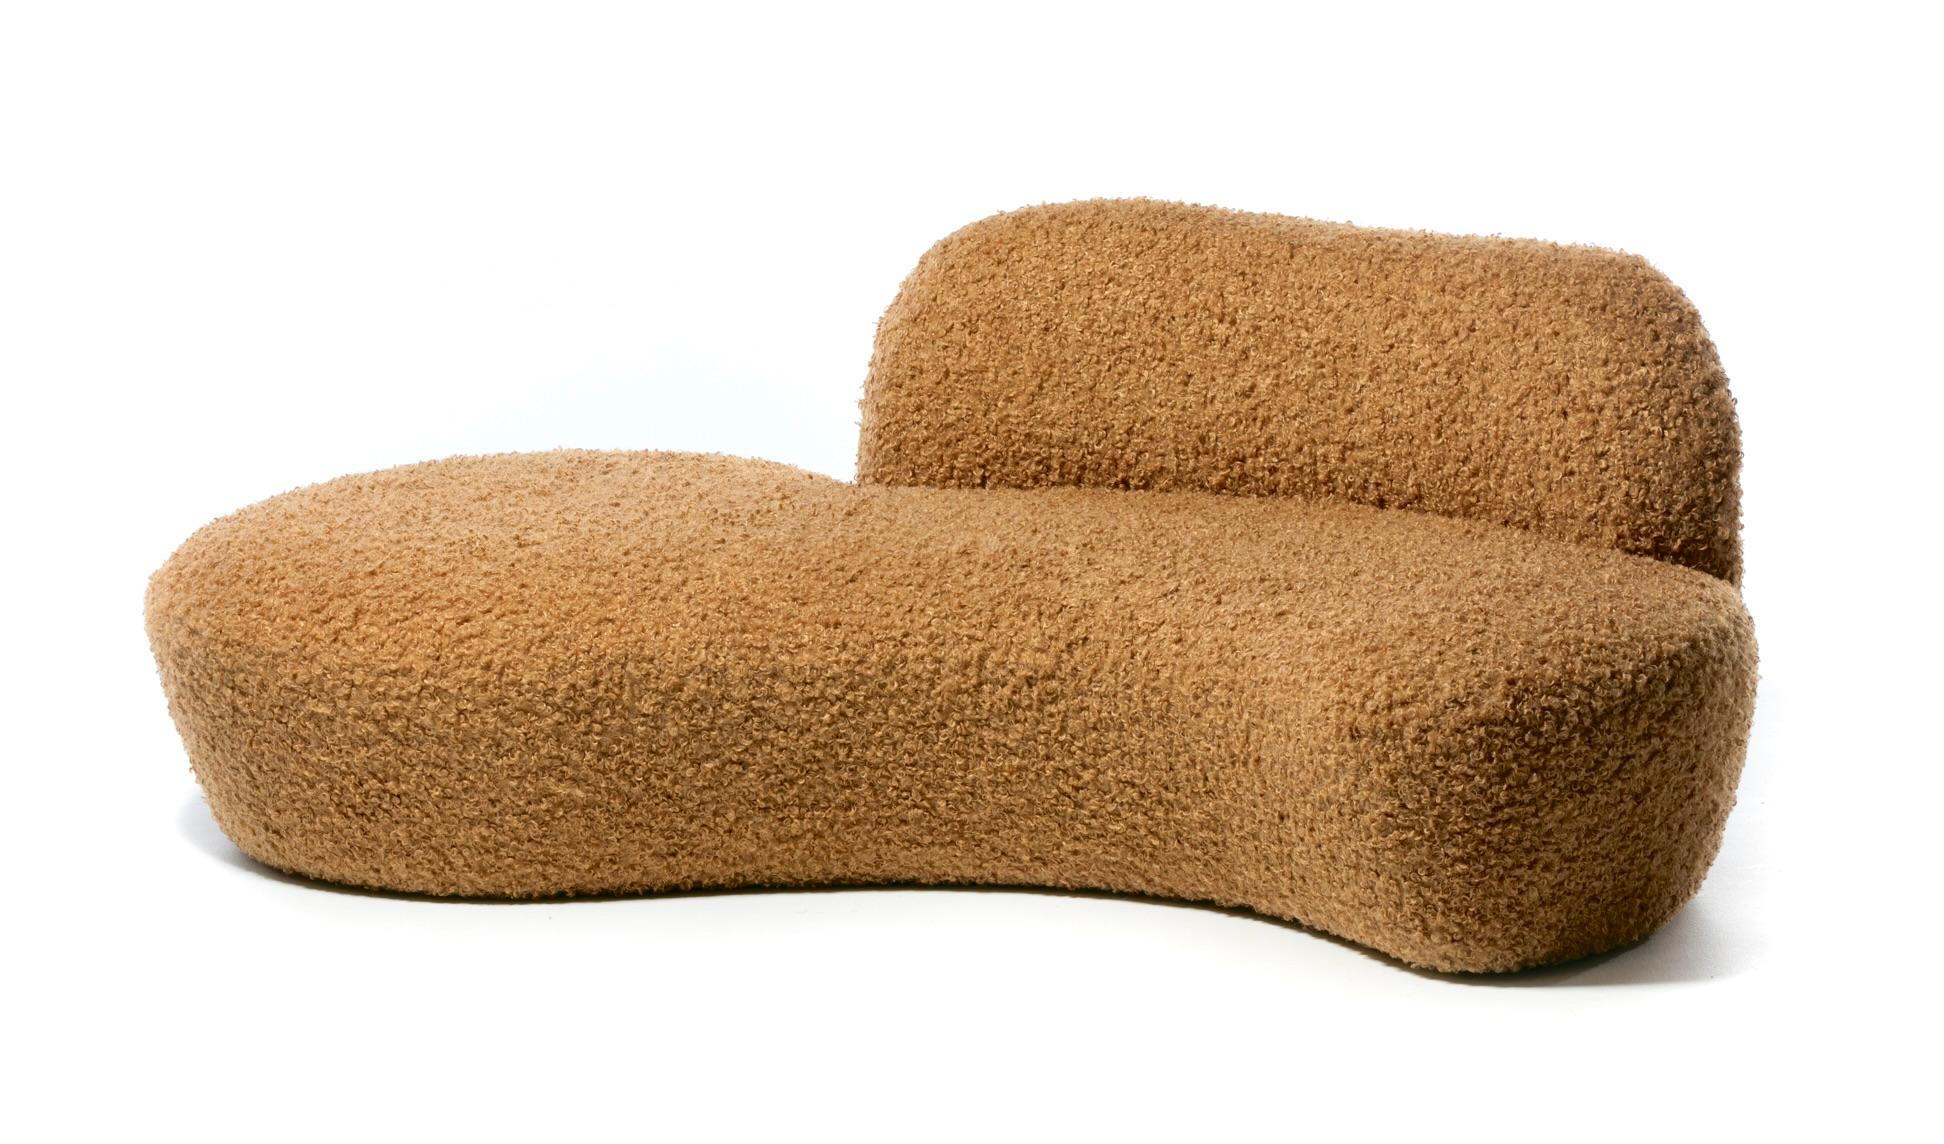 Contemporary Vladimir Kagan Zoe Sofa for American Leather in Curly Teddy Bear Camel Fabric For Sale